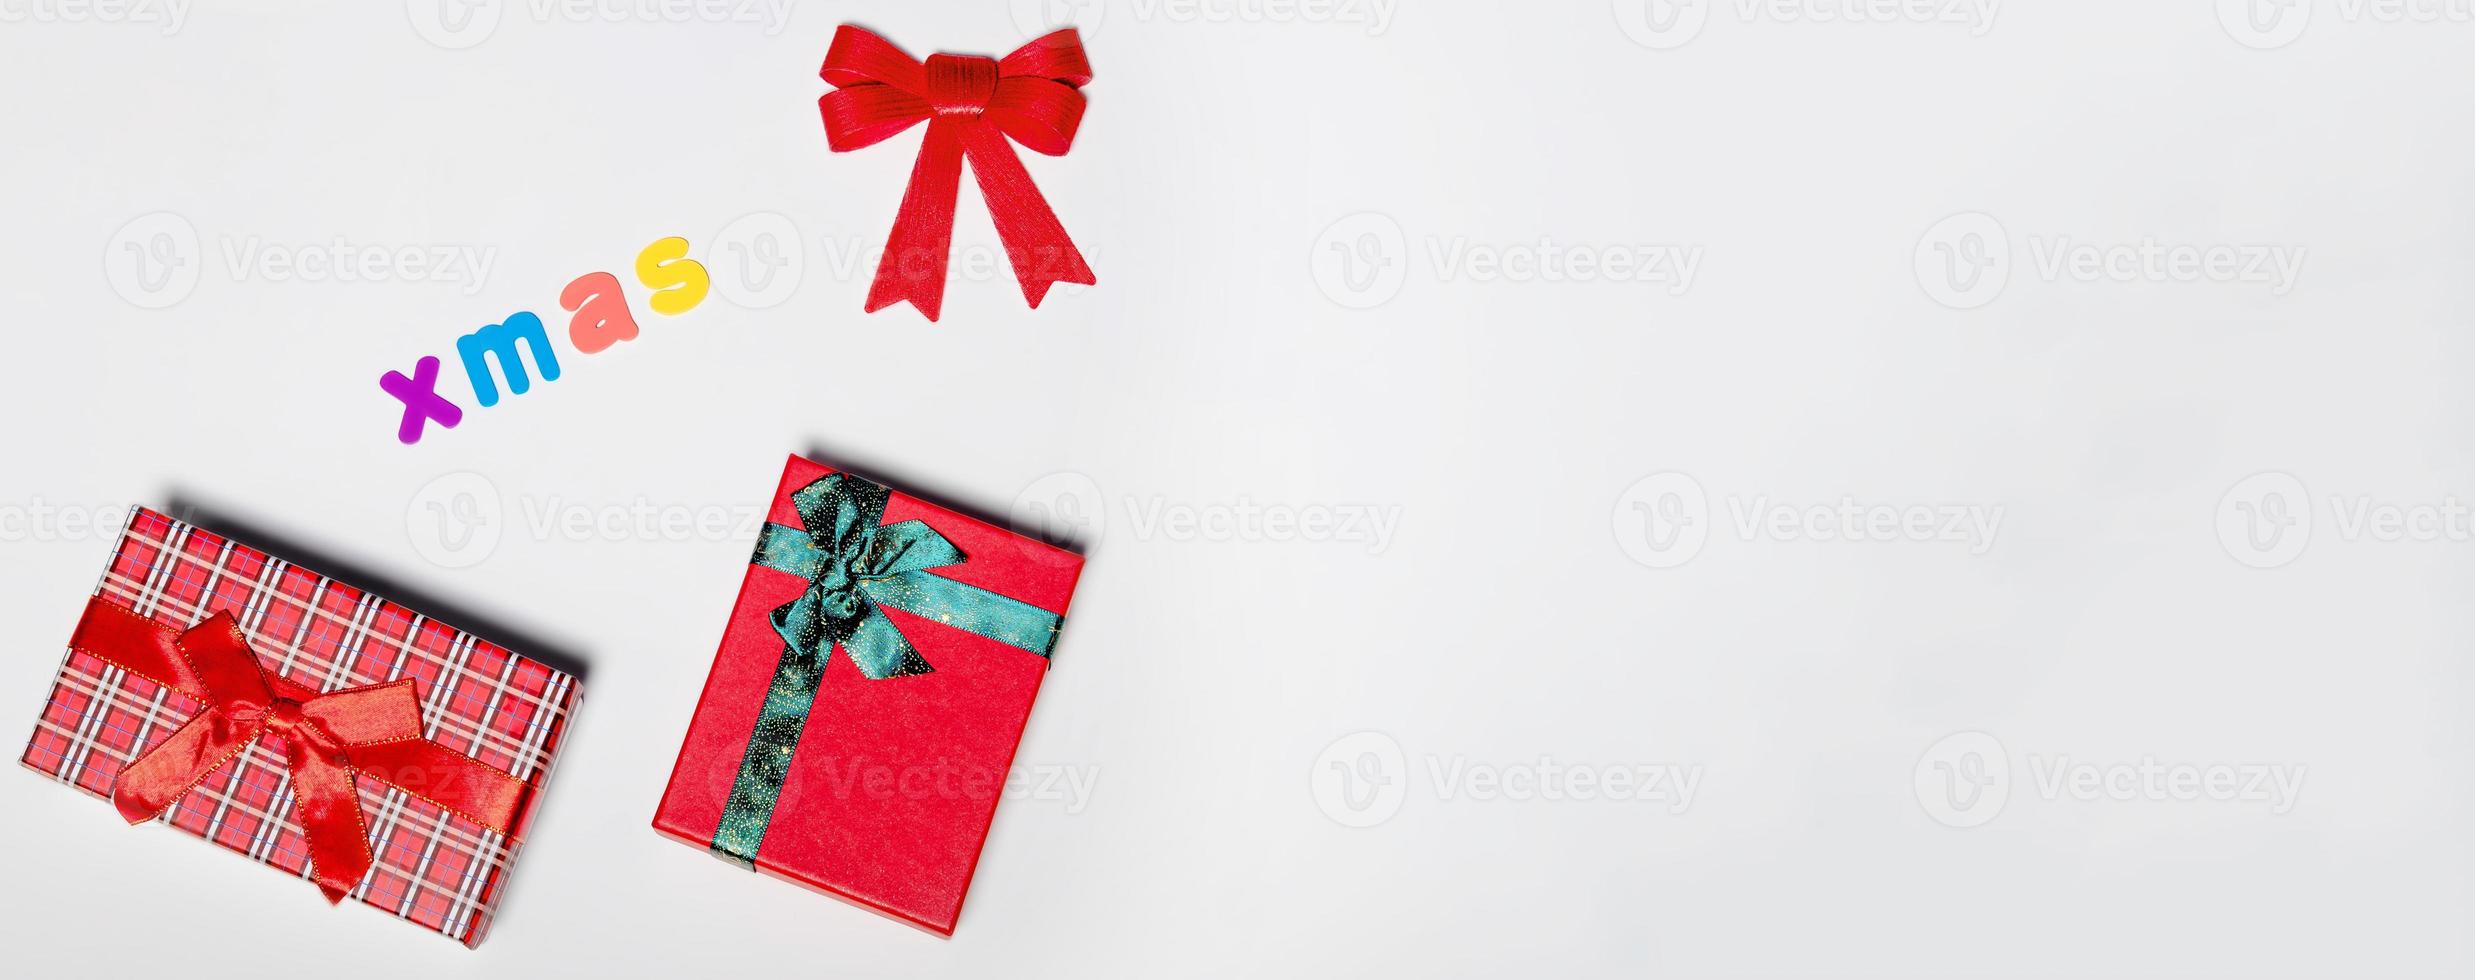 Red gift box with a green ribbon and a red bow, with the inscription Xmas on a white background. New year christmas concept. Flat lay festive mockup with copy space photo